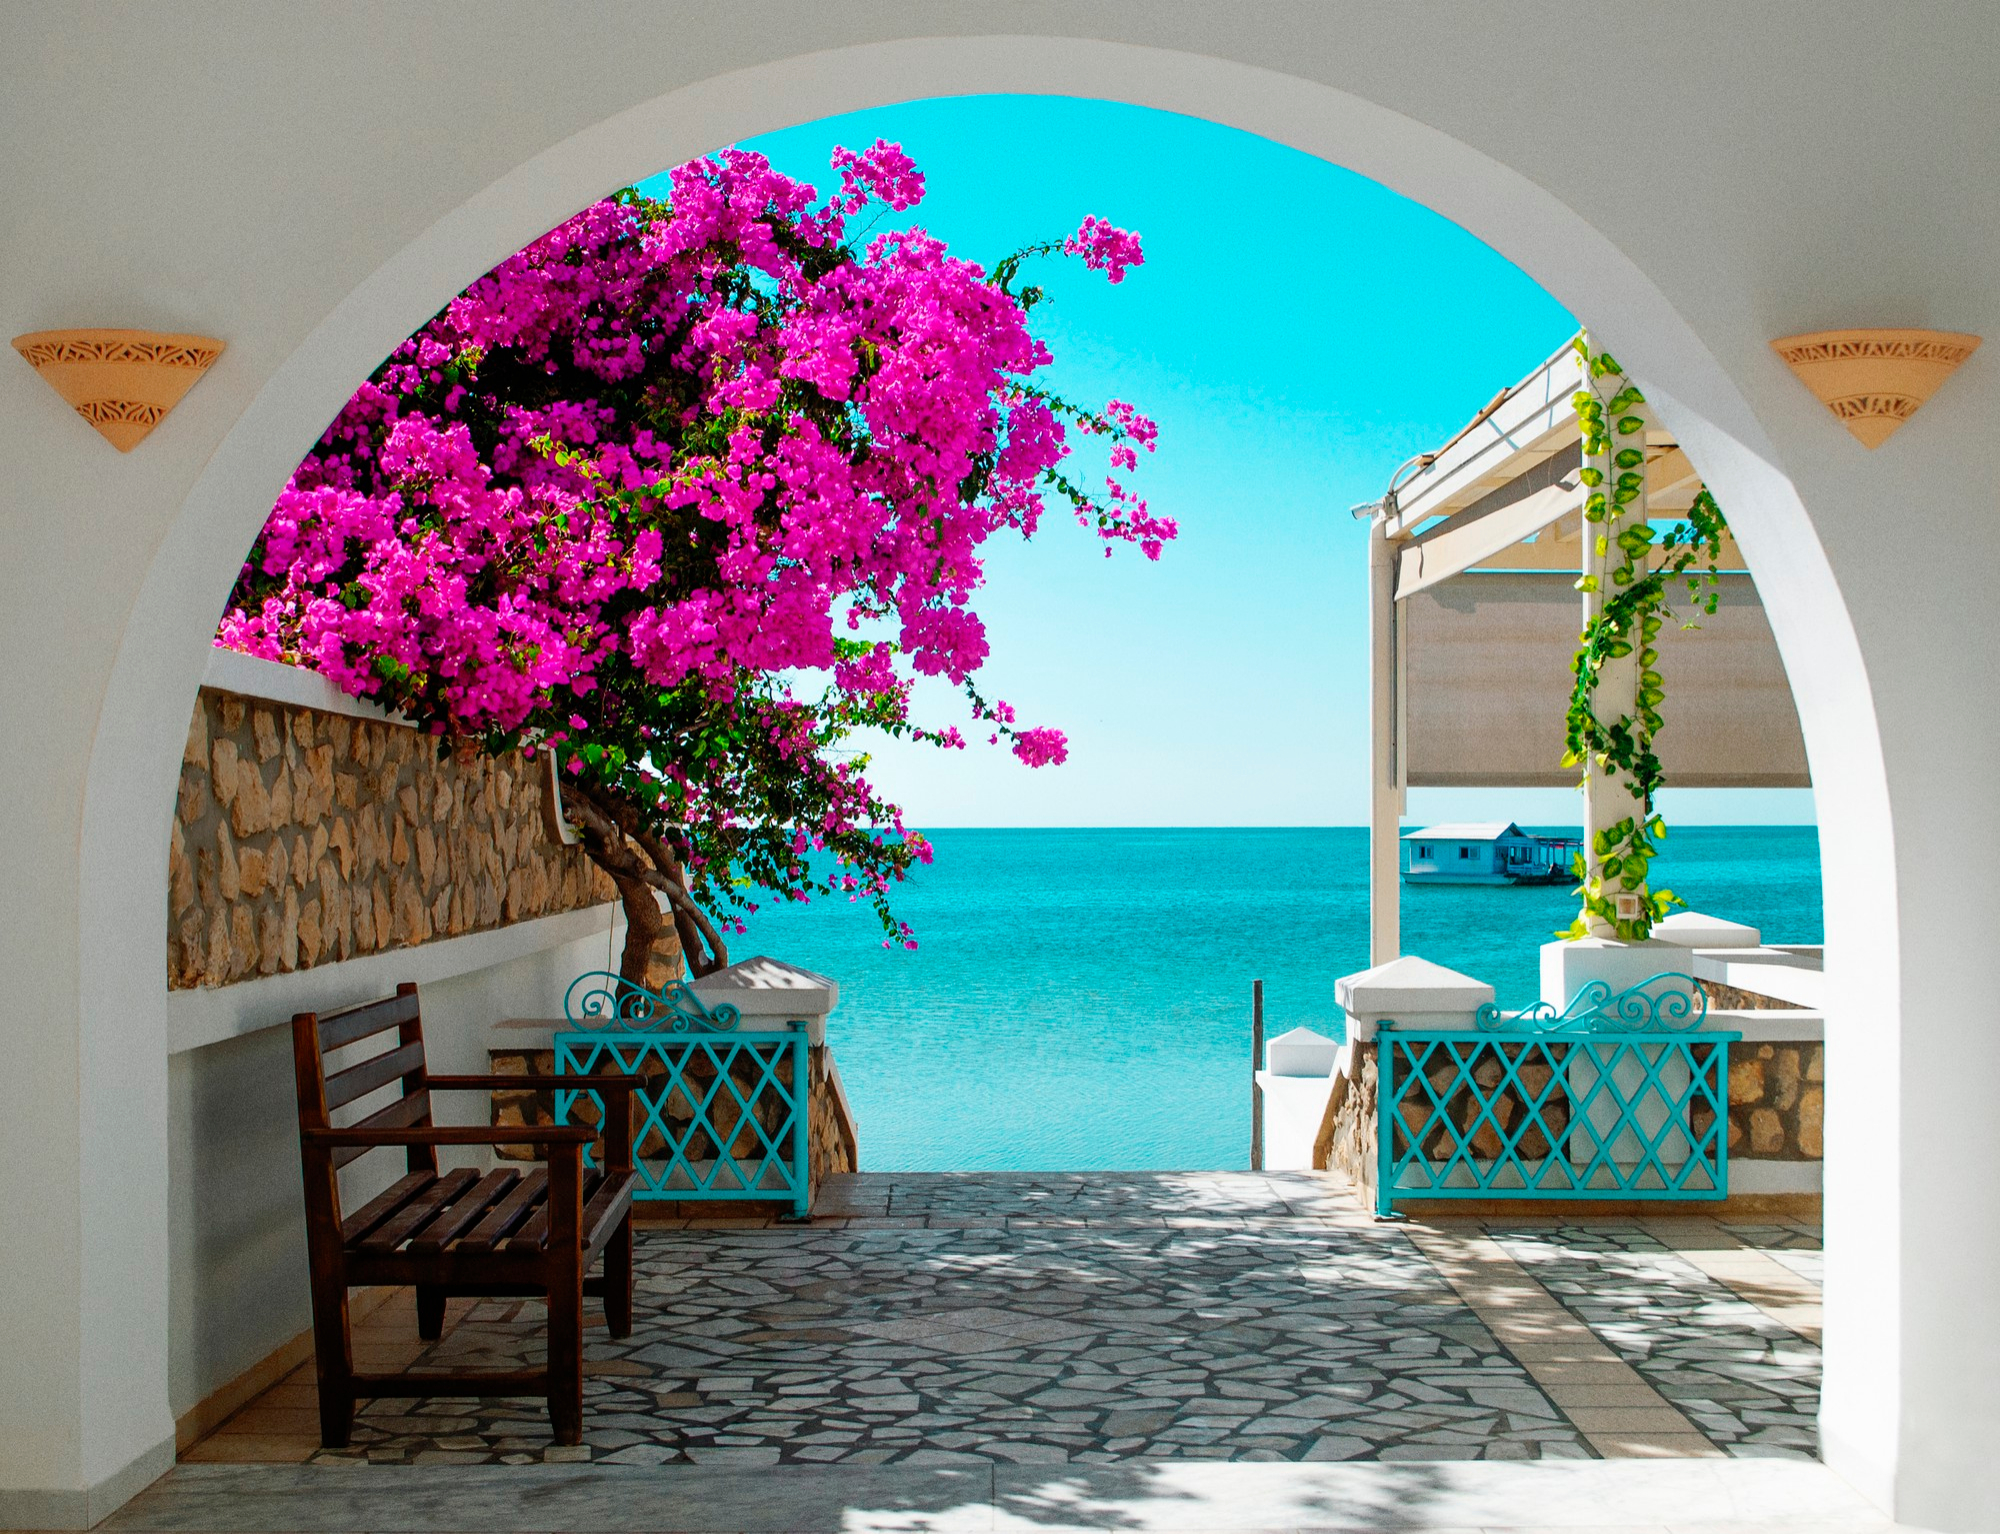 view-of-the-blue-sea-of-tunisia-through-white-archway-with-pink-blooming-flowers-in-the-foreground-in-the-distance-house-on-the-water